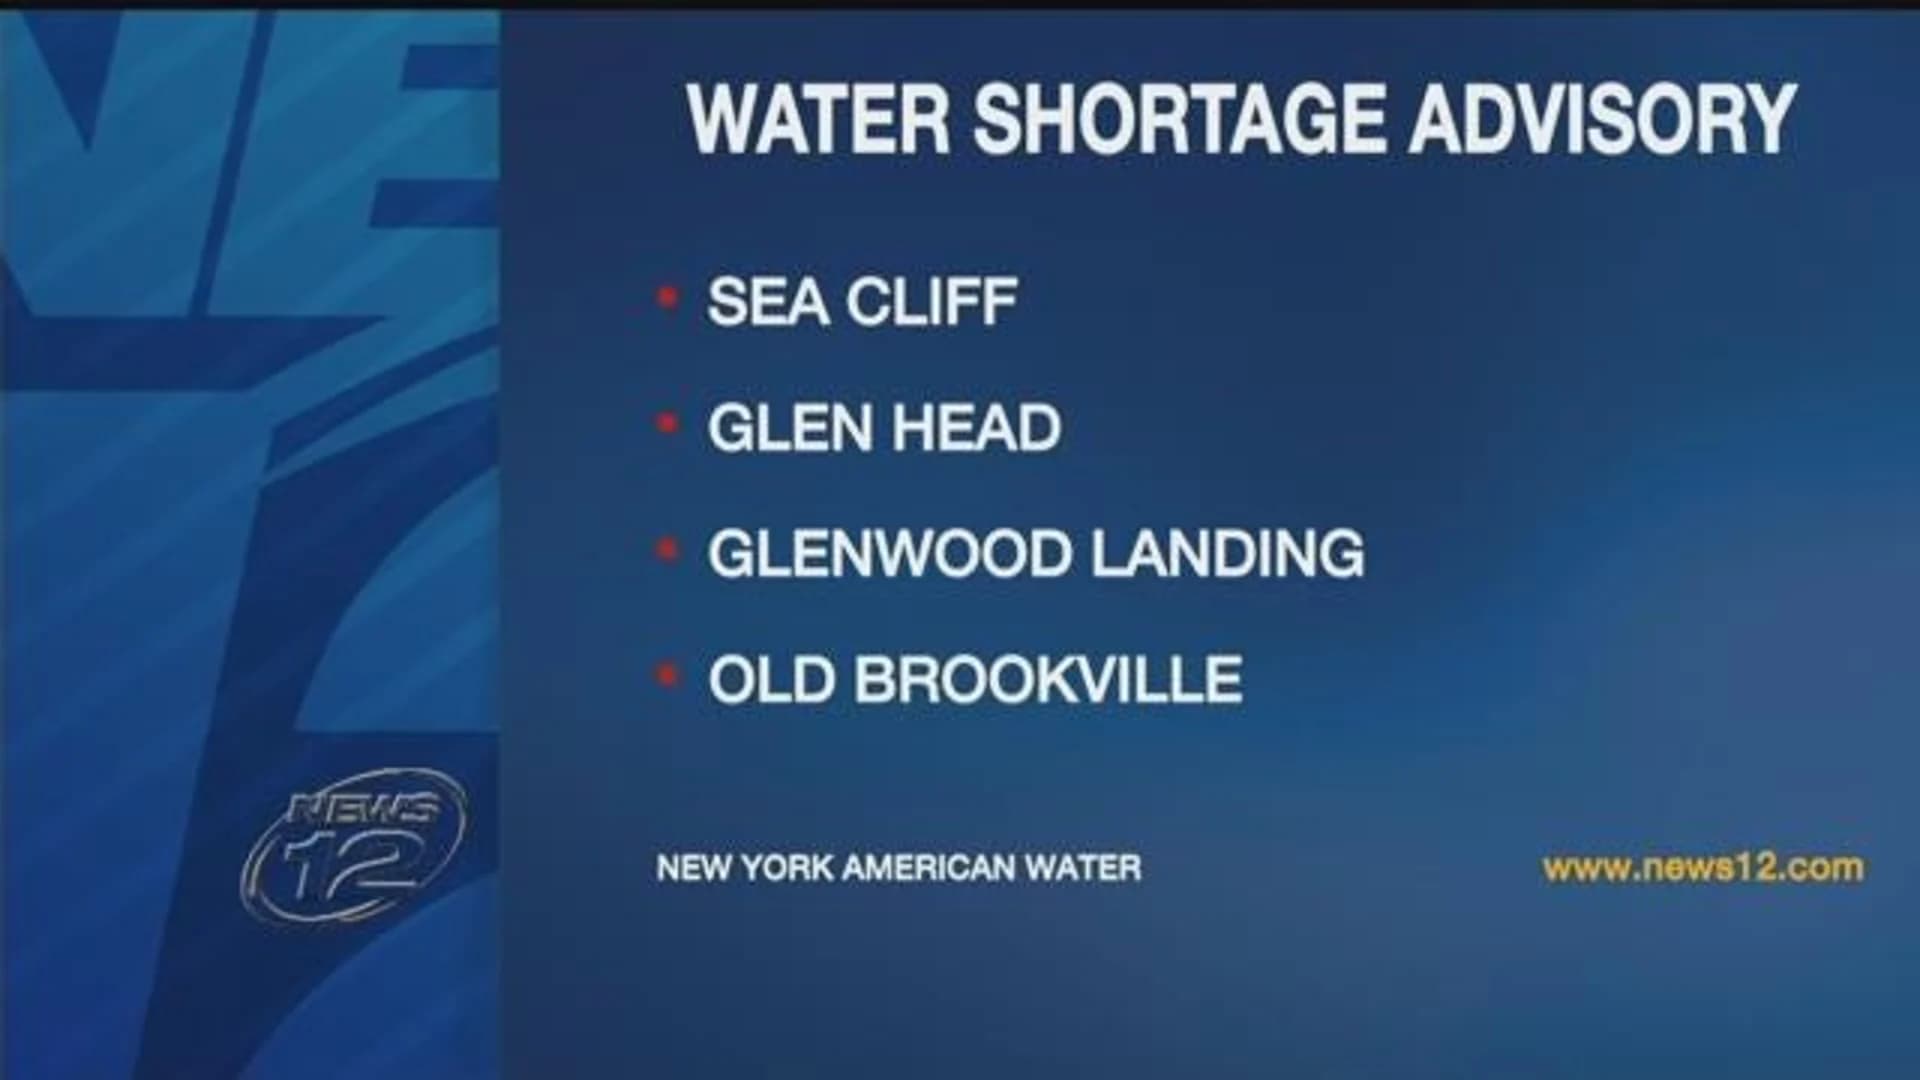 North Shore communities in Nassau urged to conserve water